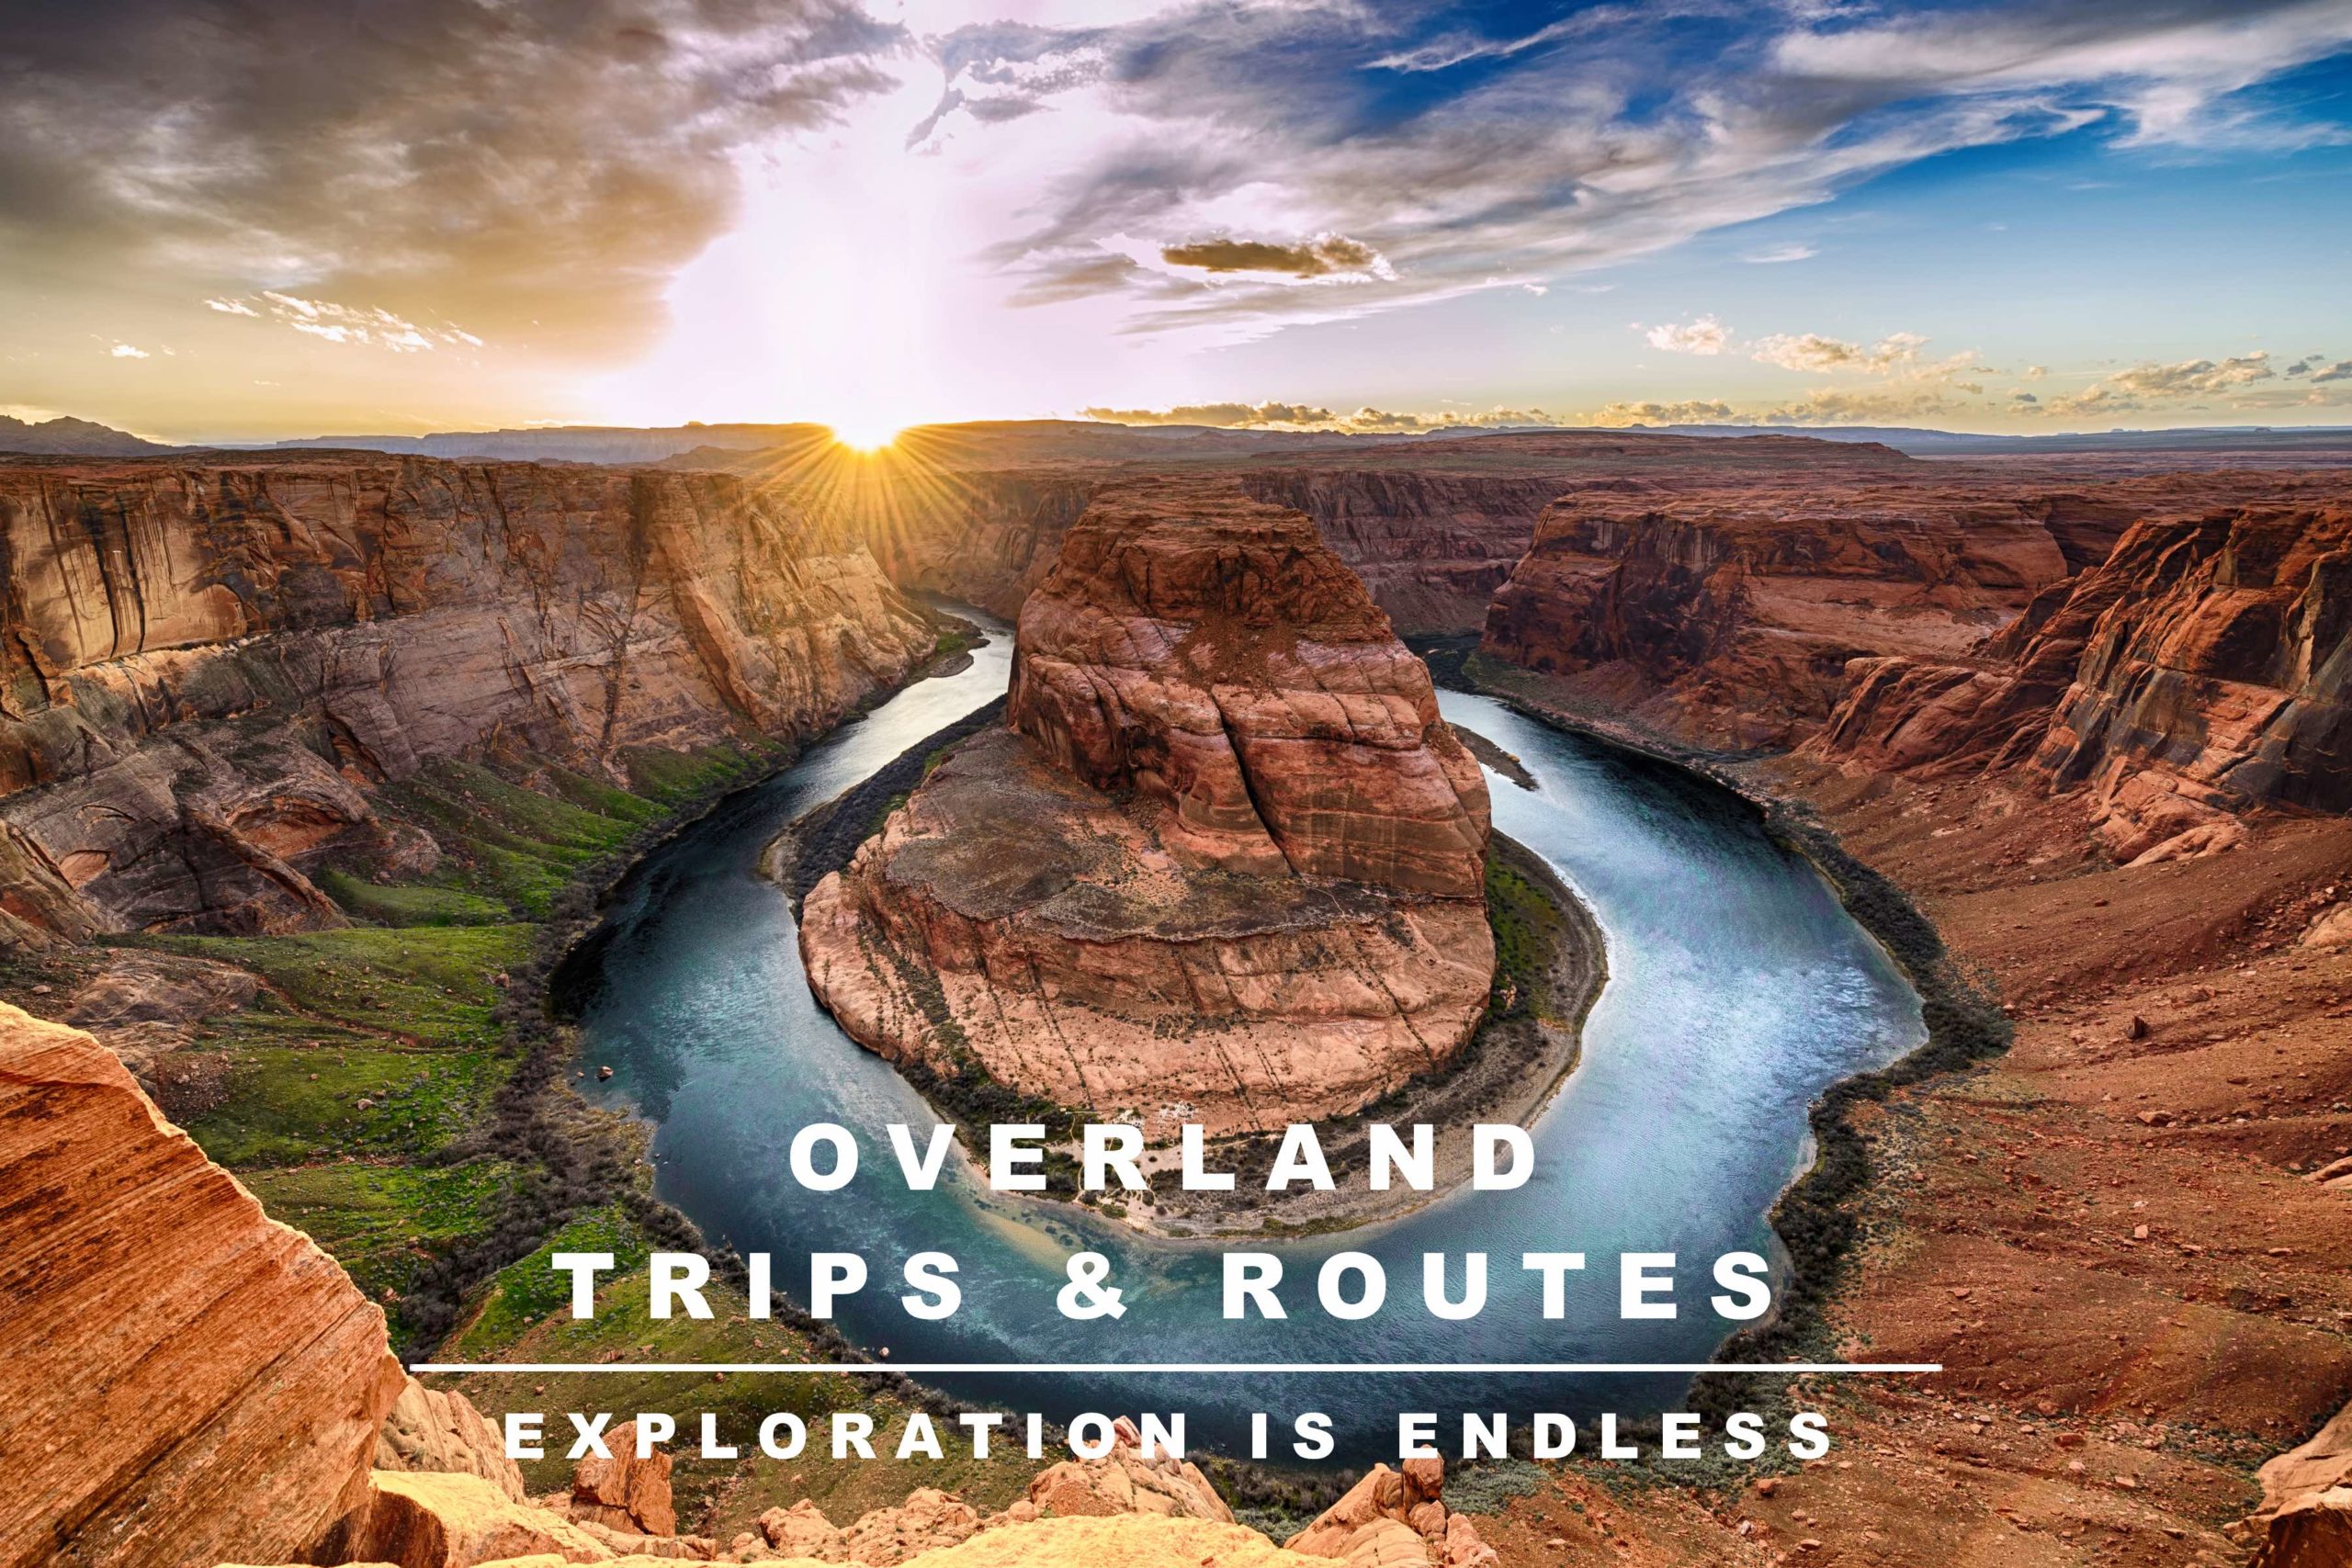 Image of Horseshoe Bend representing the overland trips and routes from Colorado Overlander